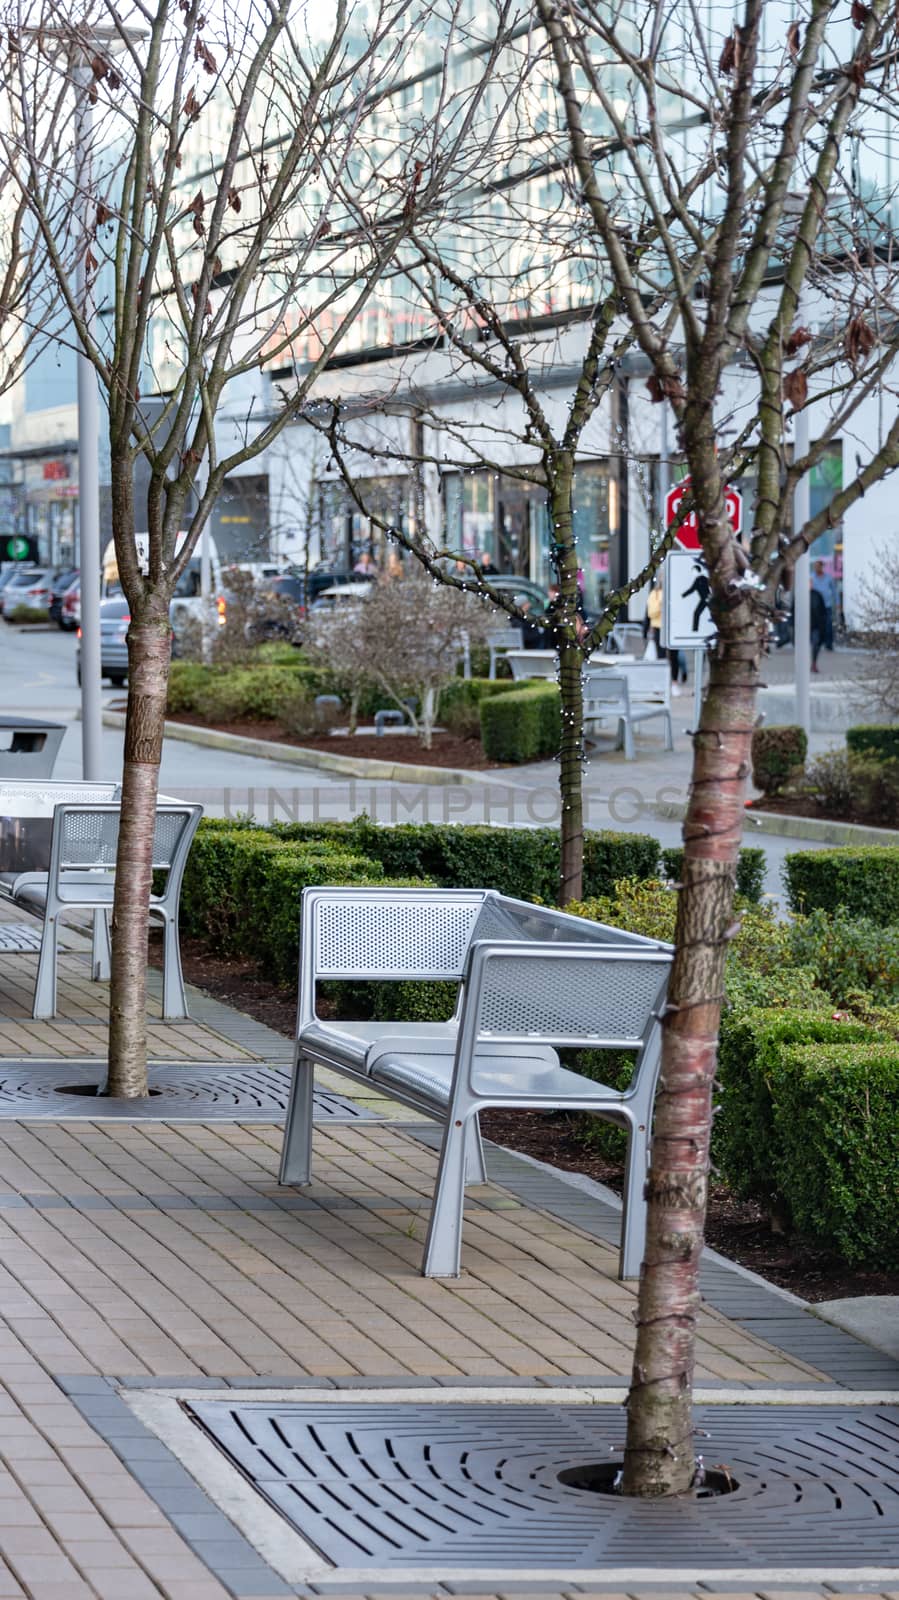 Paved walkway in a city with metal bench and highlighted trees on side by Imagenet